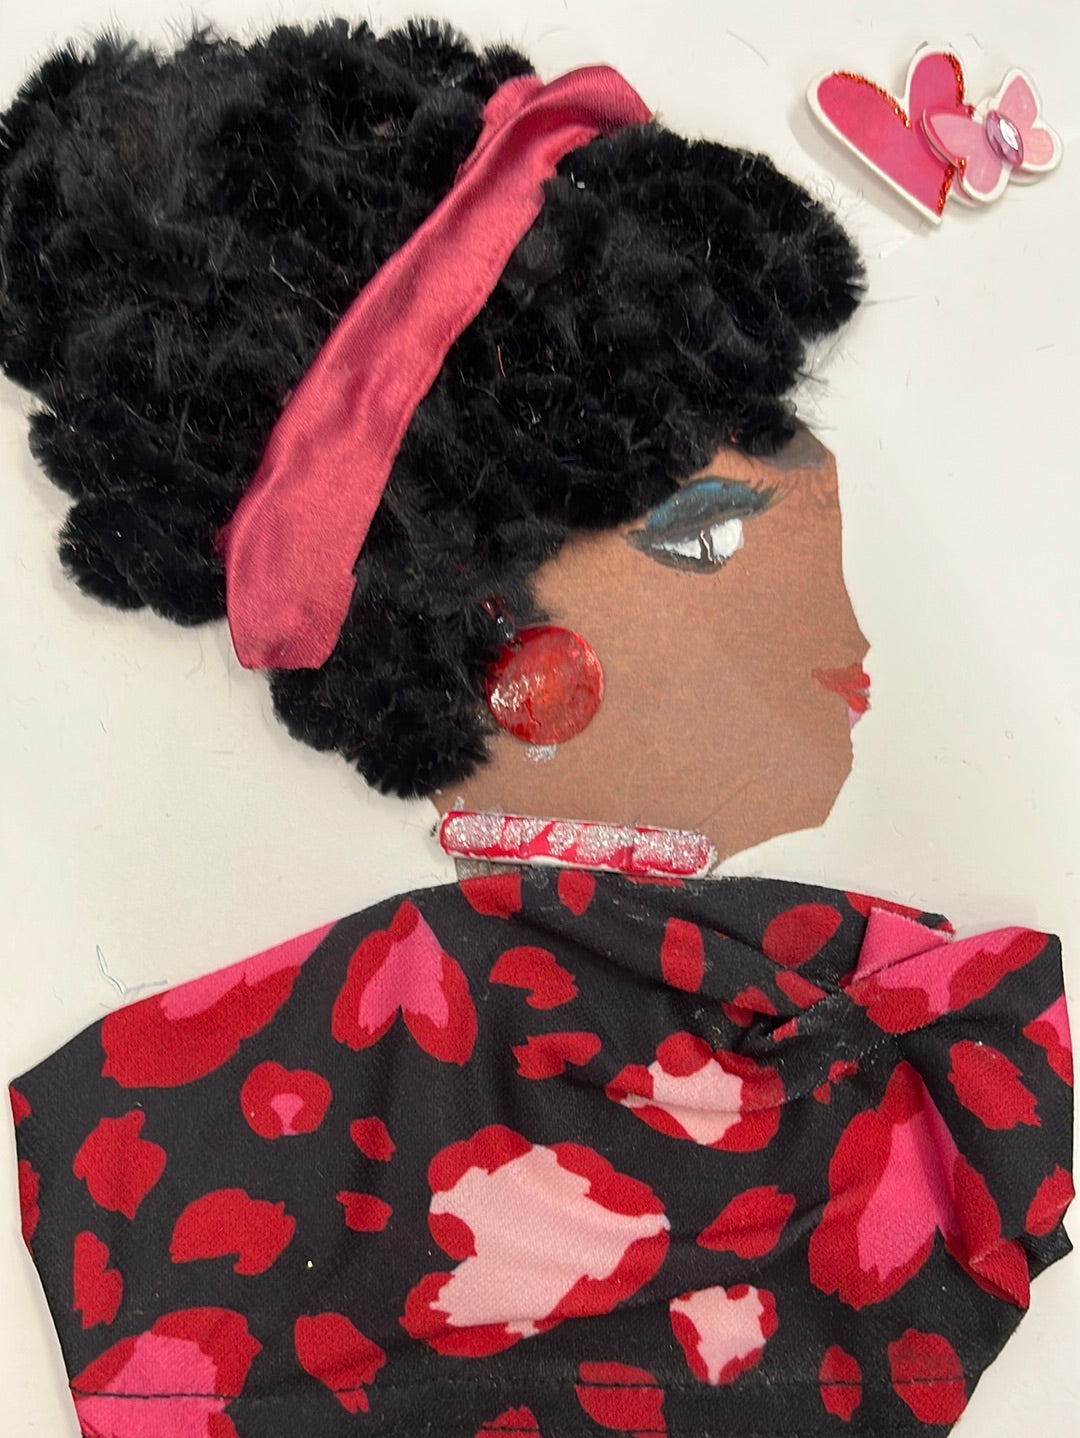 This card has been given the name Miss Maida. She wears a black blouse which has a deep pink cheetah print on it. Her necklace is pink and glittery, and her earring is red. In her black furry hair, she wears a red silky ribbon as a headband. In the top right corner of the card, there is a small sticker of a heart and a butterfly.